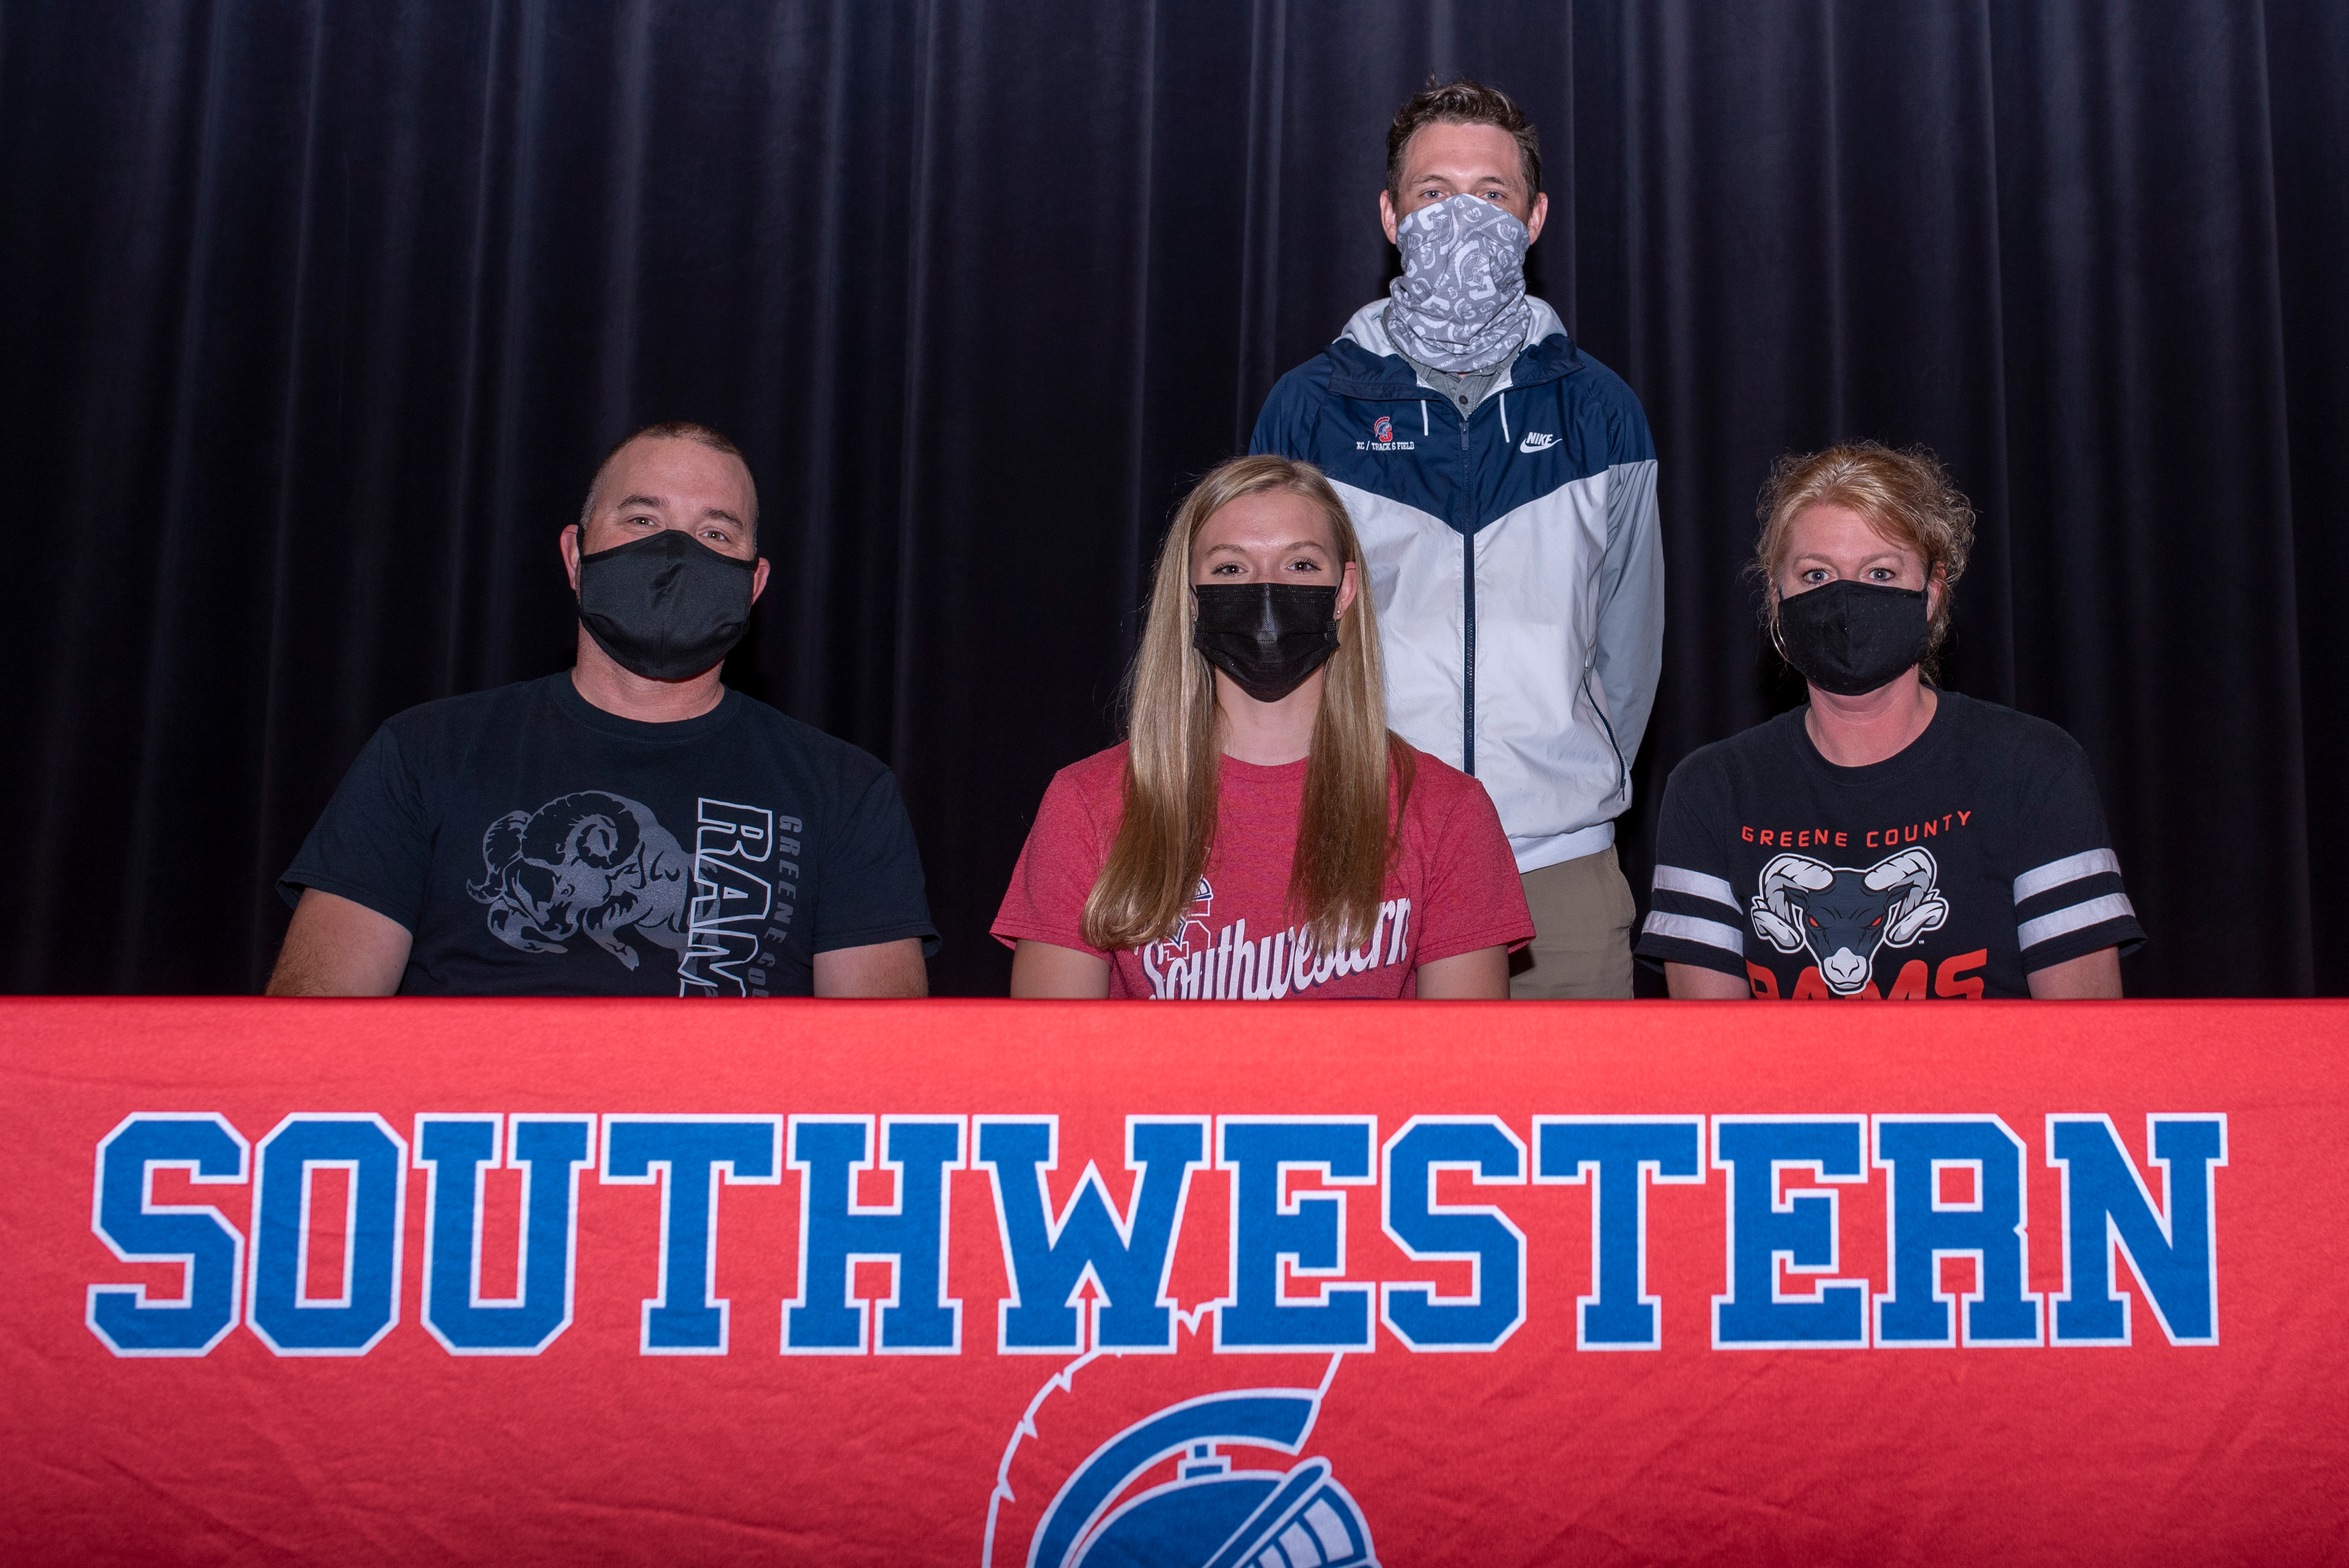 Brianna Osterson, center, signs her National Letter of Intent with Southwestern Community College to run track and field. Also pictured are Brianna's parents Jim and Lynnae Osterson, and Southwestern Director of Cross Country/Track & Field Scott Vicker.